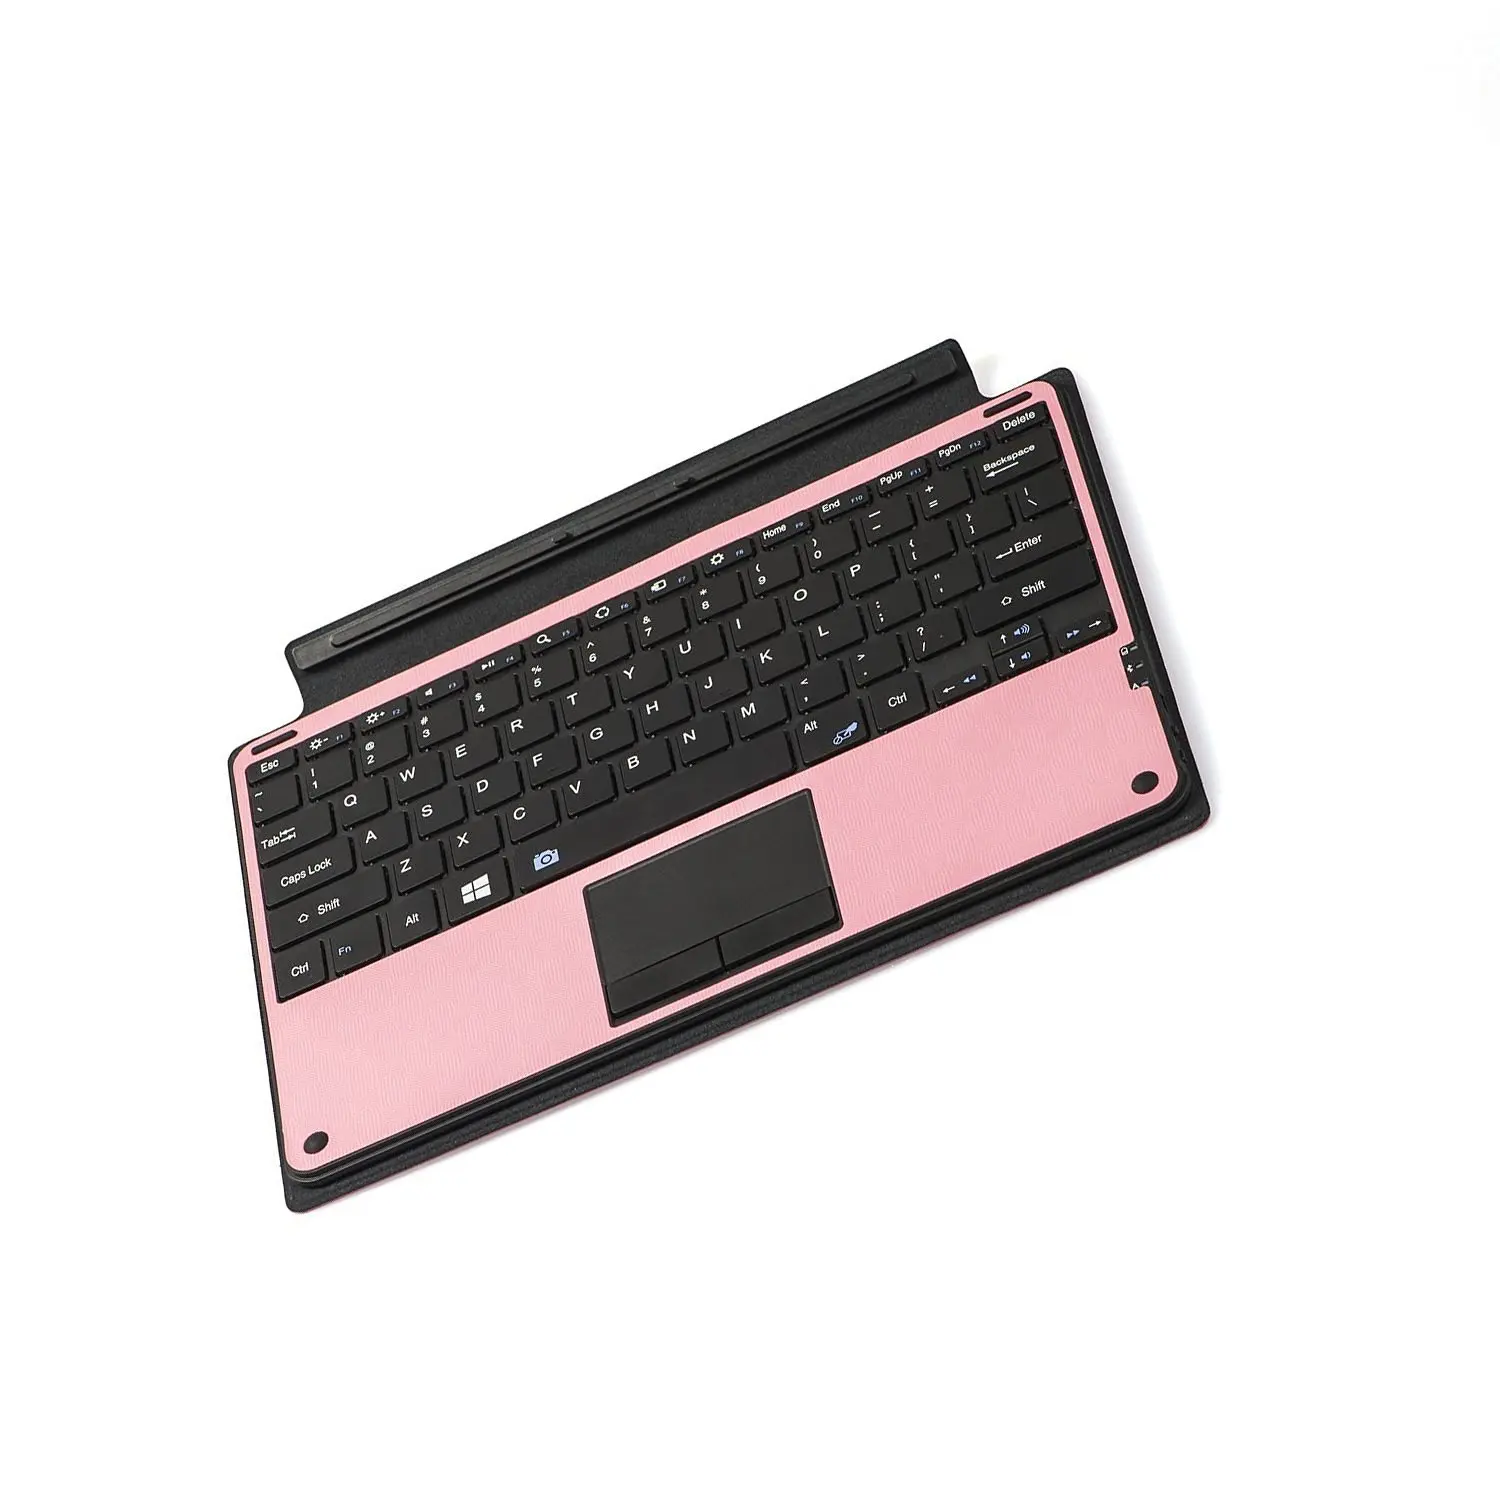 Buy Ginamart Surface Pro 3 Detachable Abs Wireless Bluetooth Keyboard Pu Leather Case With Touch Pad For Microsoft Surface Pro 3 12 2 Inch Tablet Pink In Cheap Price On Alibaba Com